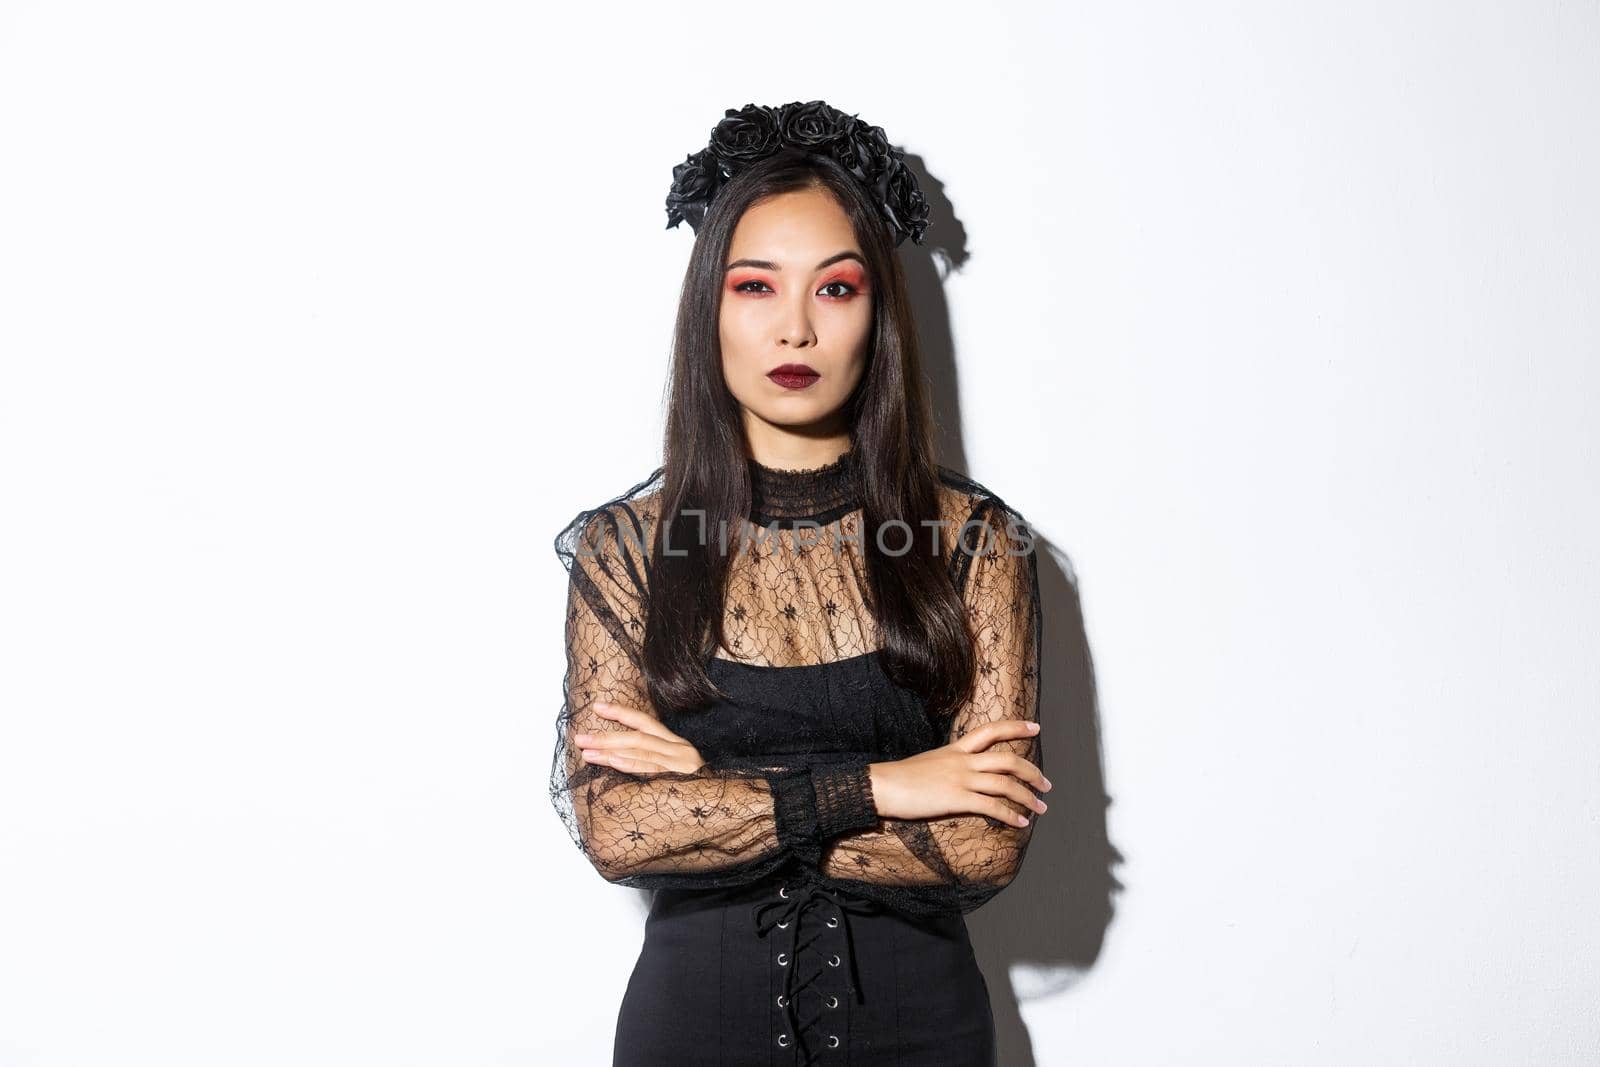 Skeptical young asian woman in witch or widow costume looking doubtful. Female dressed-up for halloween party, wearing black lace dress and wreath.